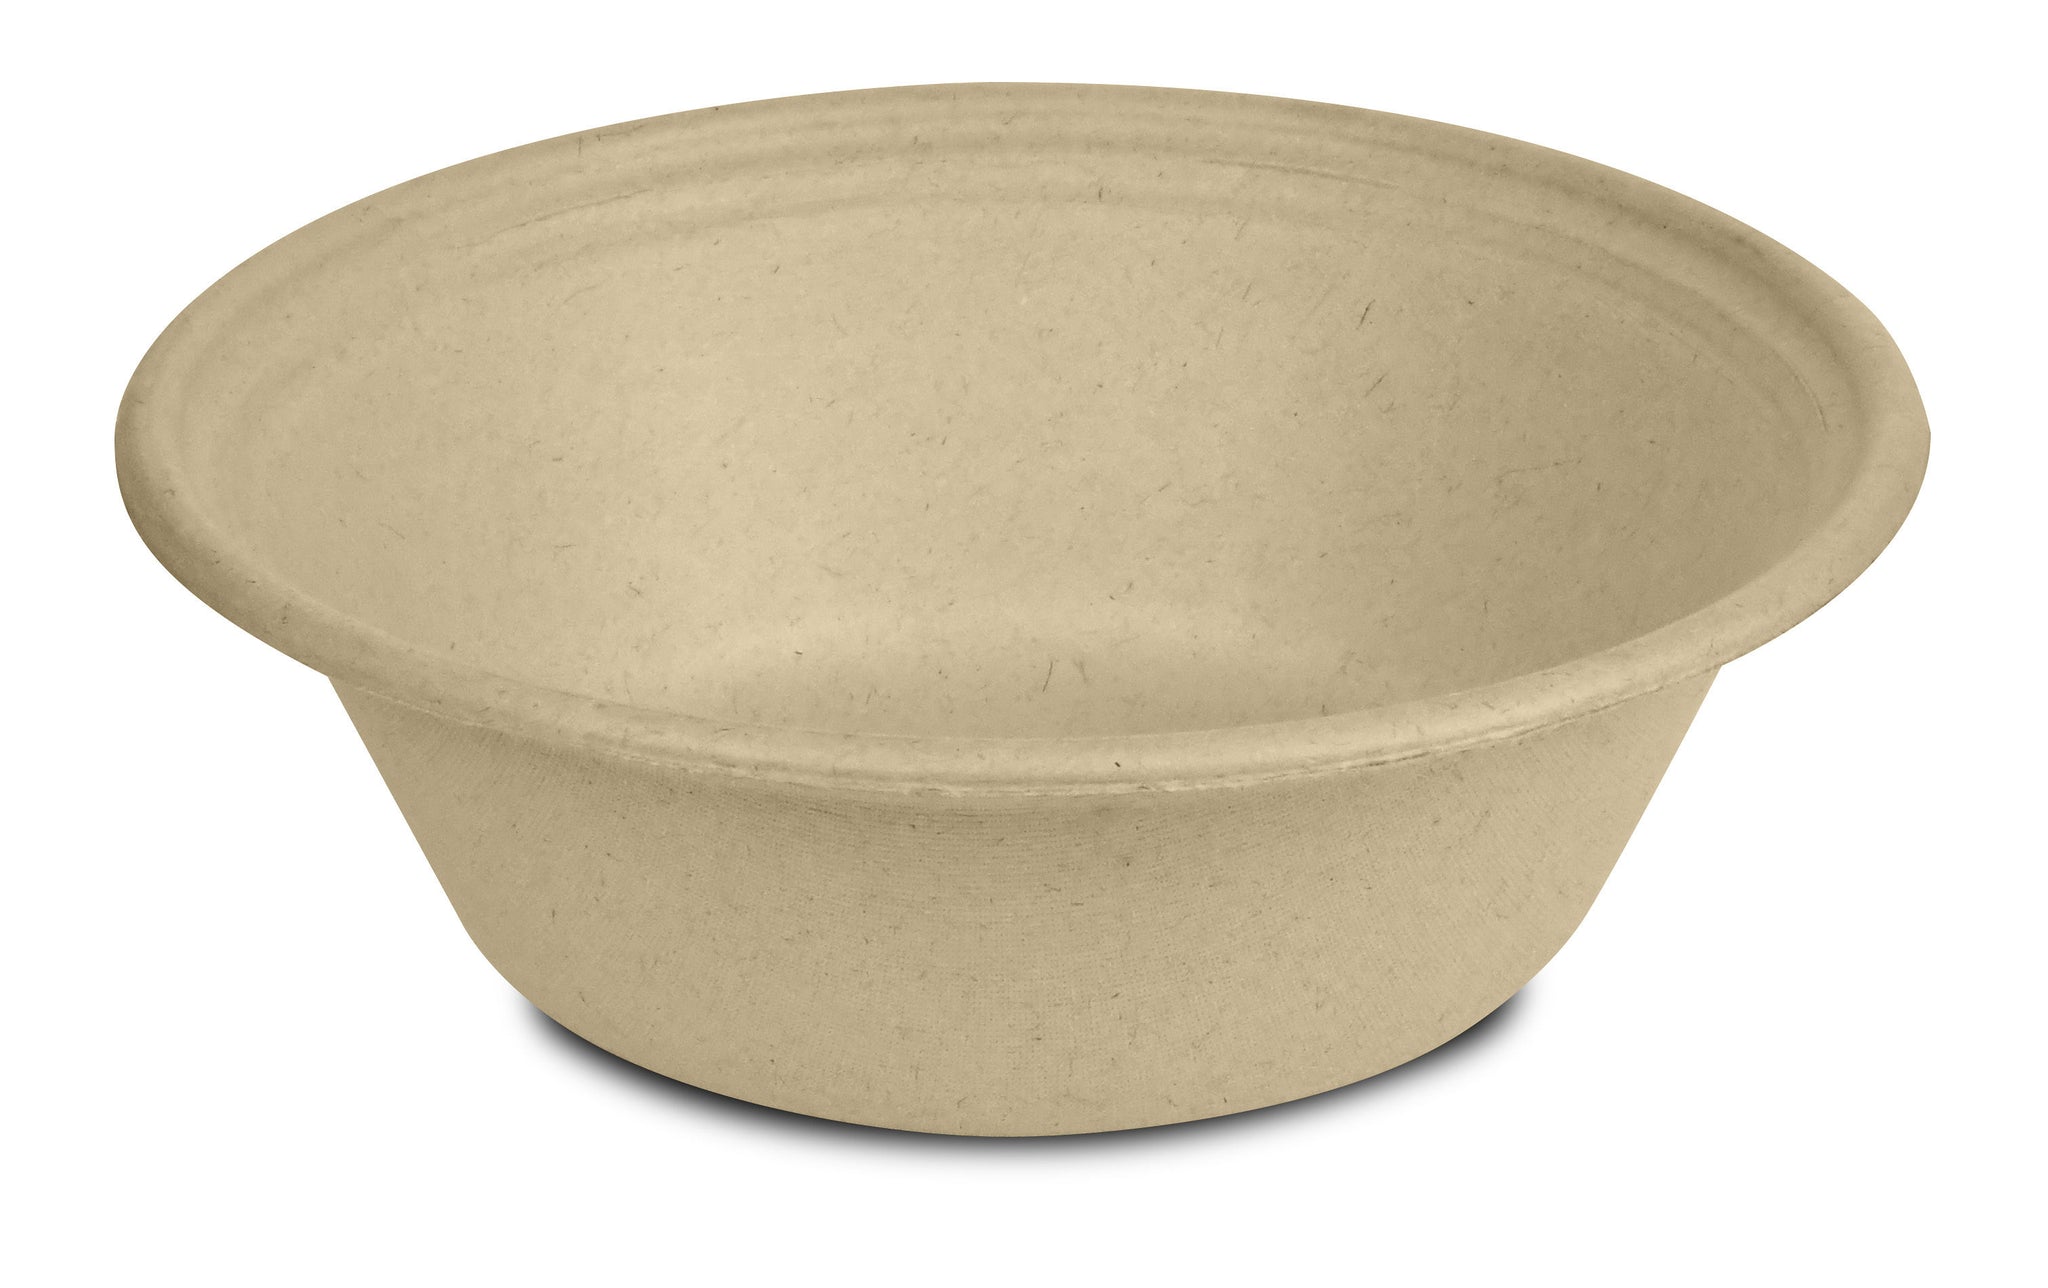 32 oz. Microwavable Round Gold Bowl